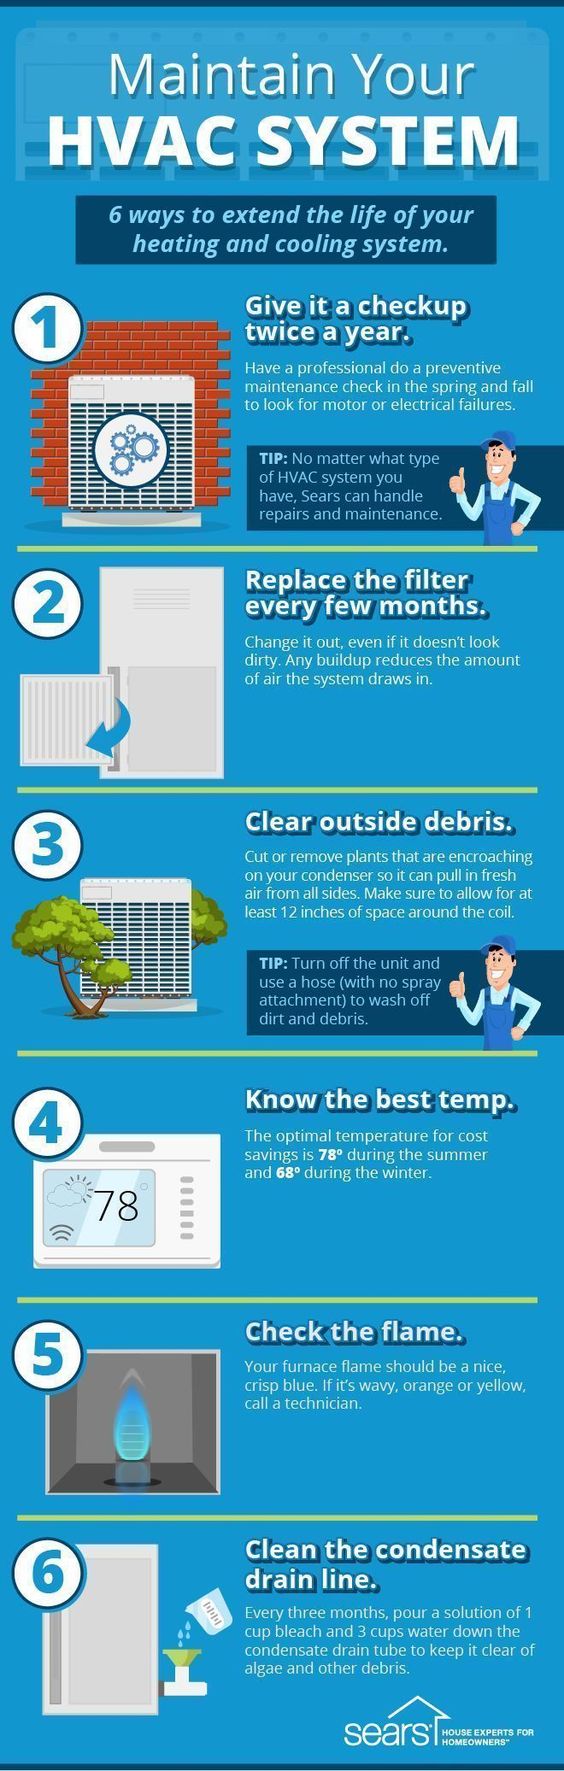 How to maintain your HVAC System